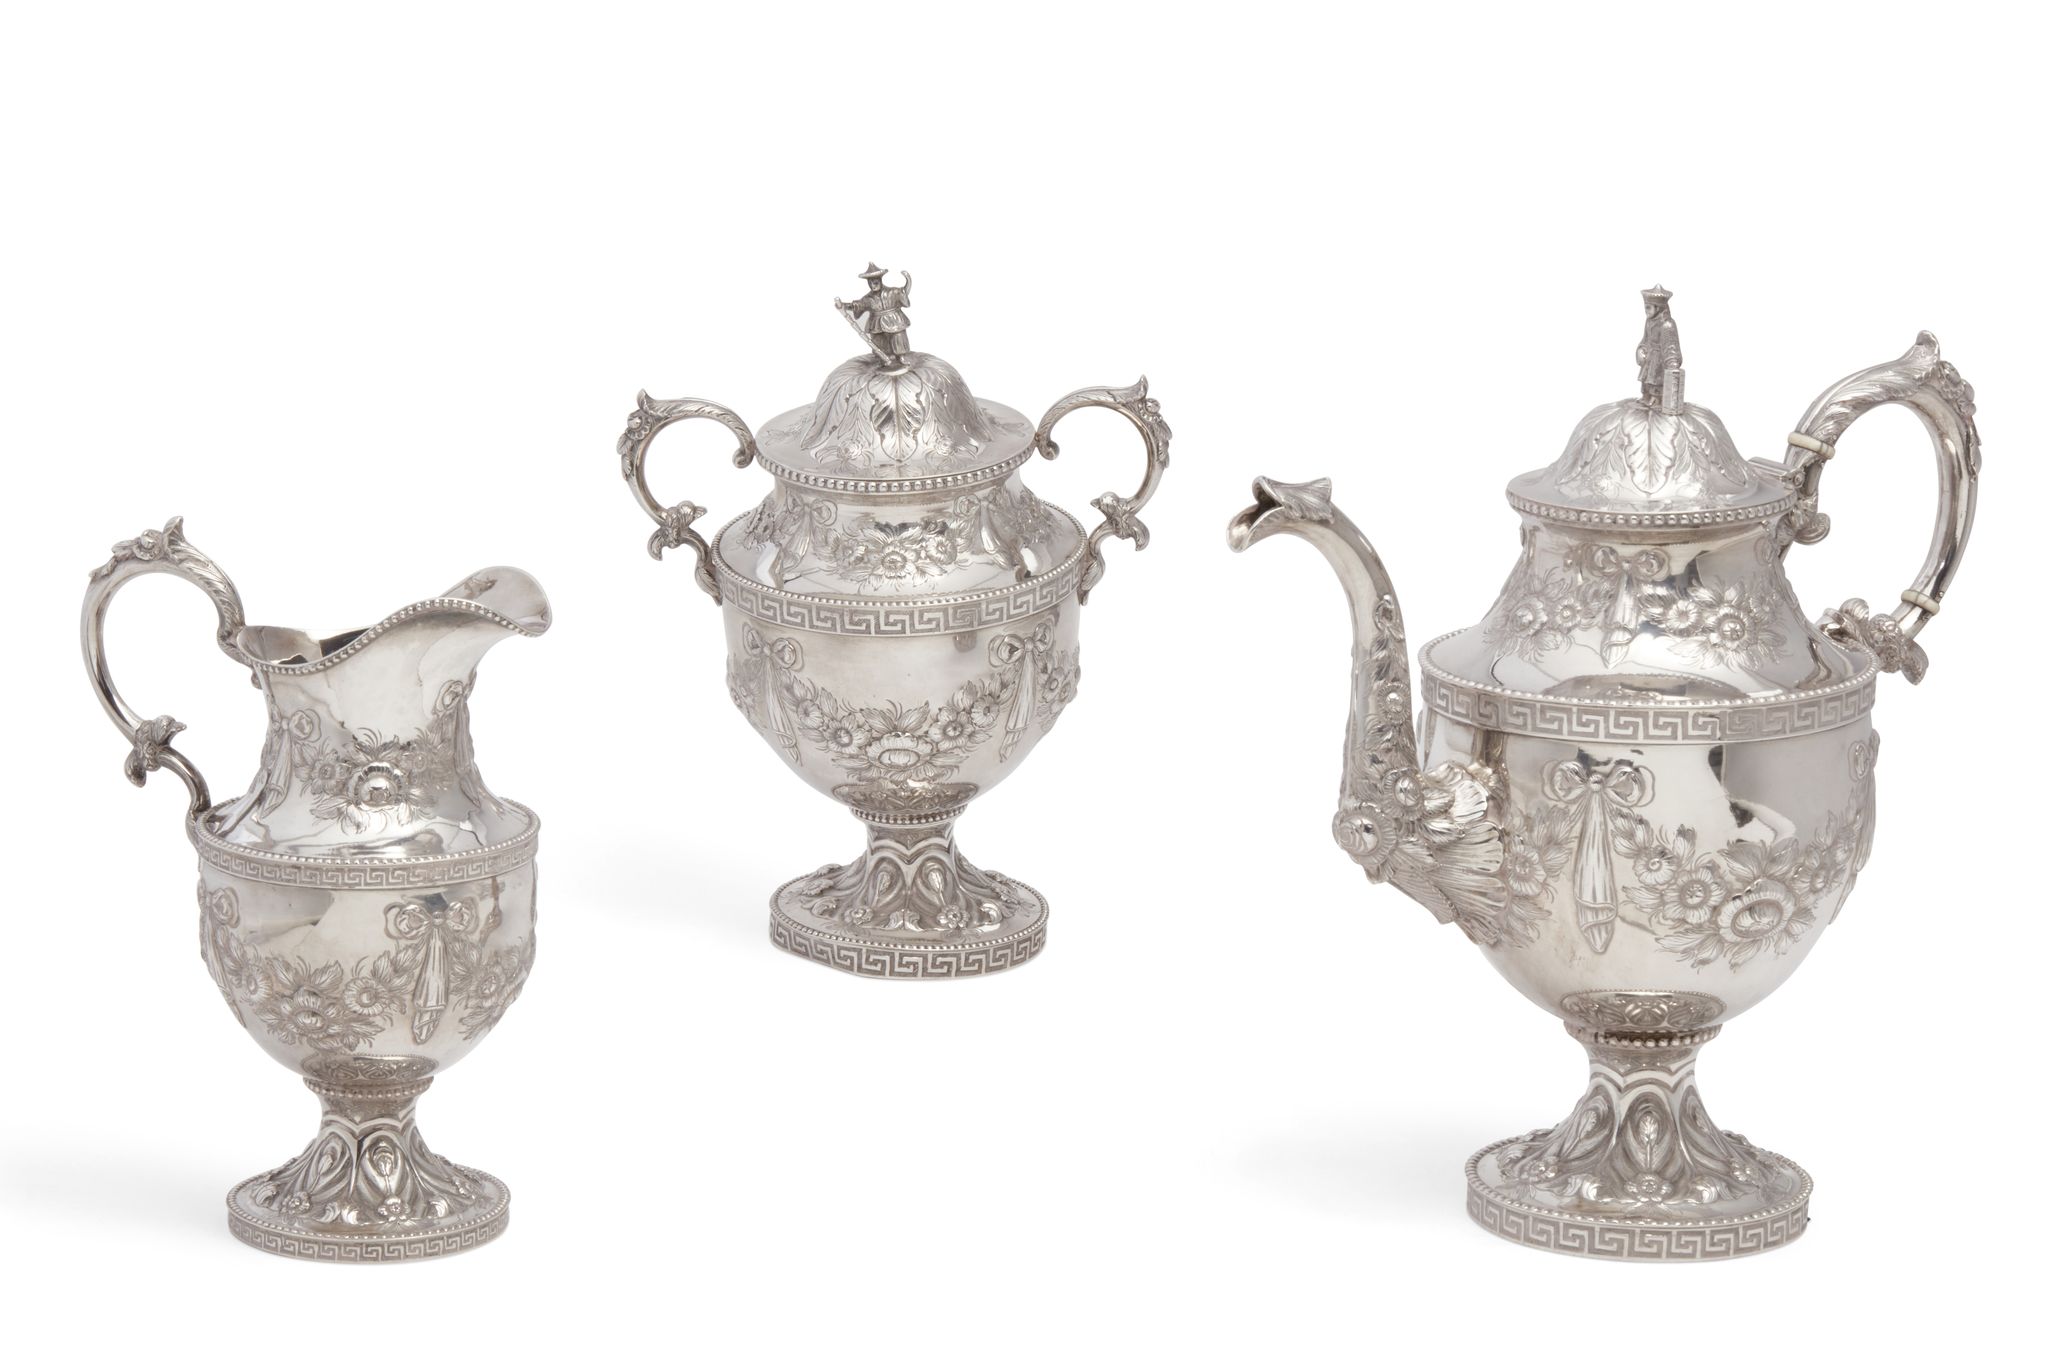 Circa-1825 American coin silver three-piece coffee service by R & W Wilson, from the Mitzi Gaynor collection, est. $800-$1,200